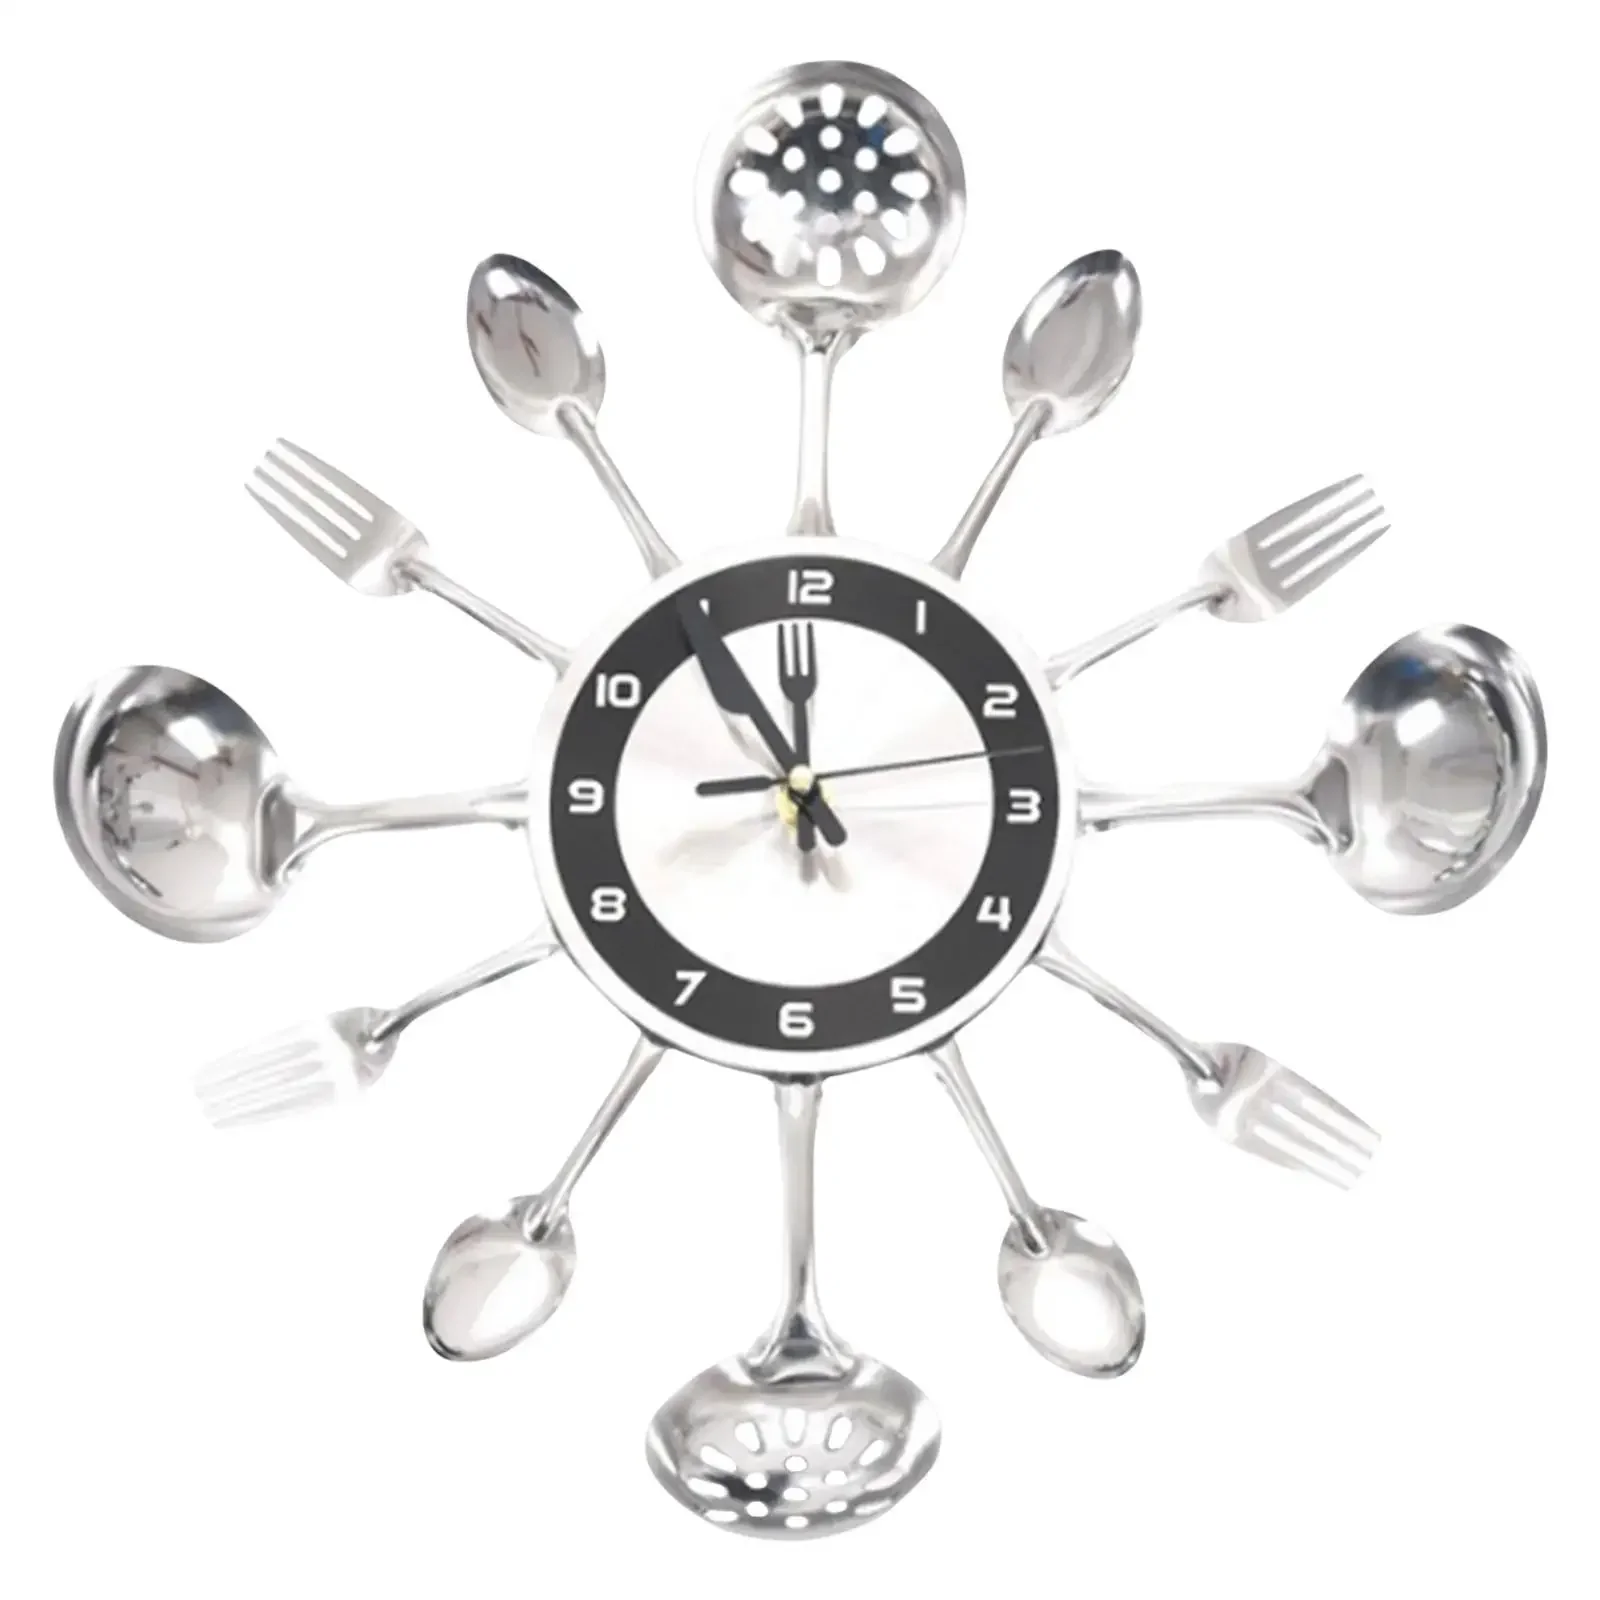 Kitchen Wall Clock Cutlery Kitchen Utensil with Spoons and Forks Wall Watch Silent Decorative Wall Clock for Kitchen Decor